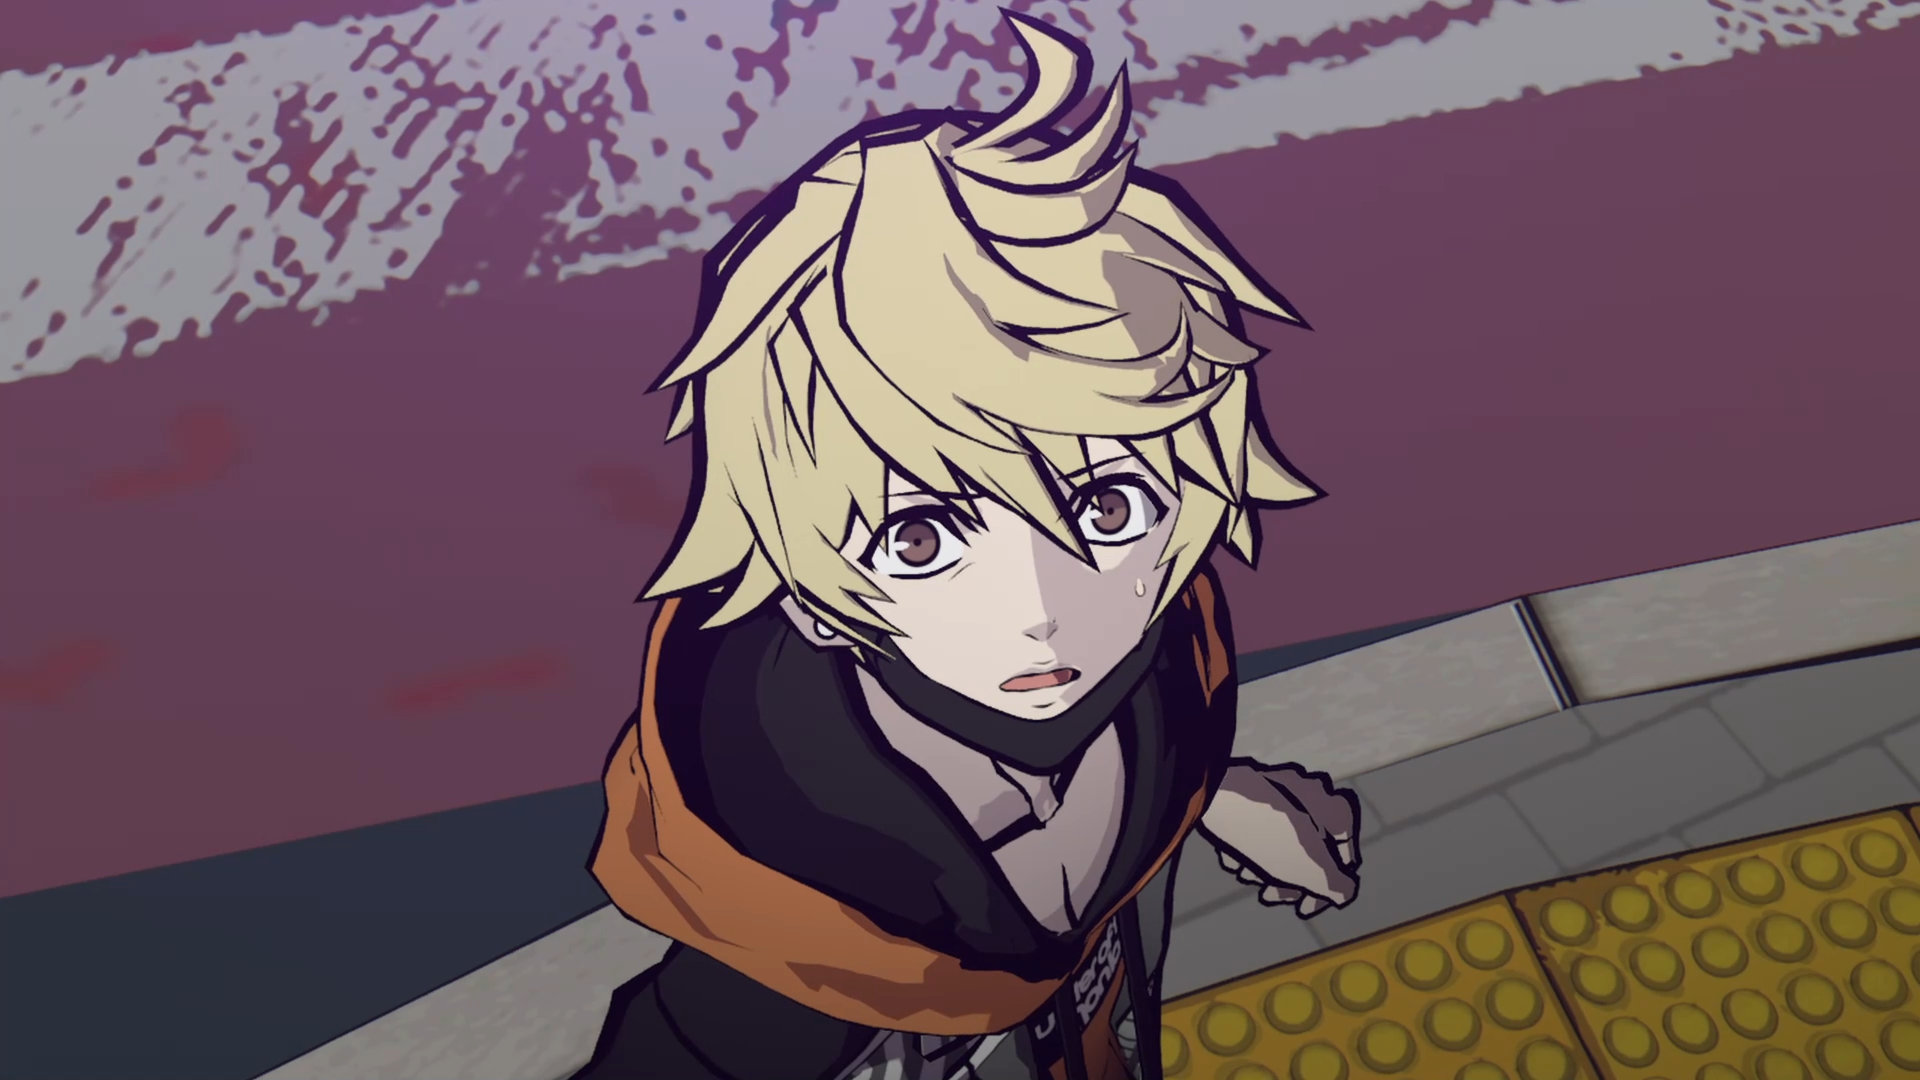 Someone is surprised in NEO: The World Ends With You